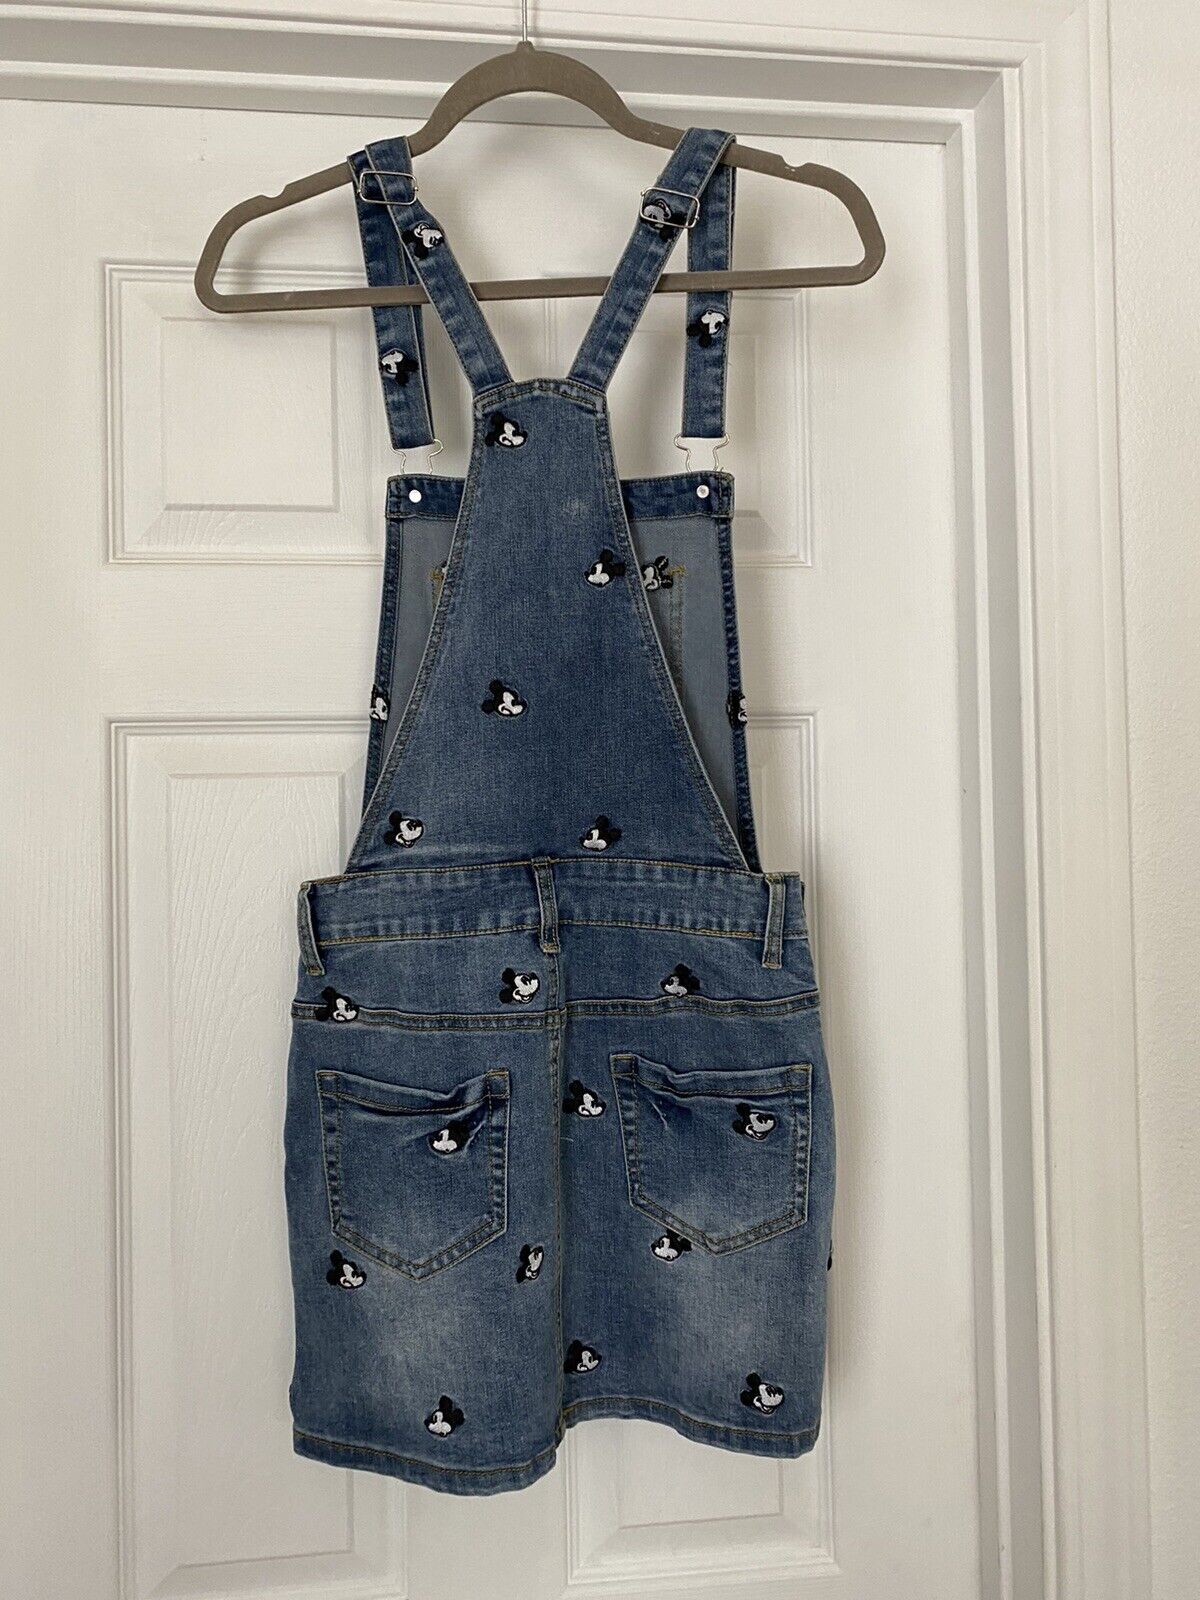 NWT cakeworthy mickey mouse womens denim jean skirt overalls size small